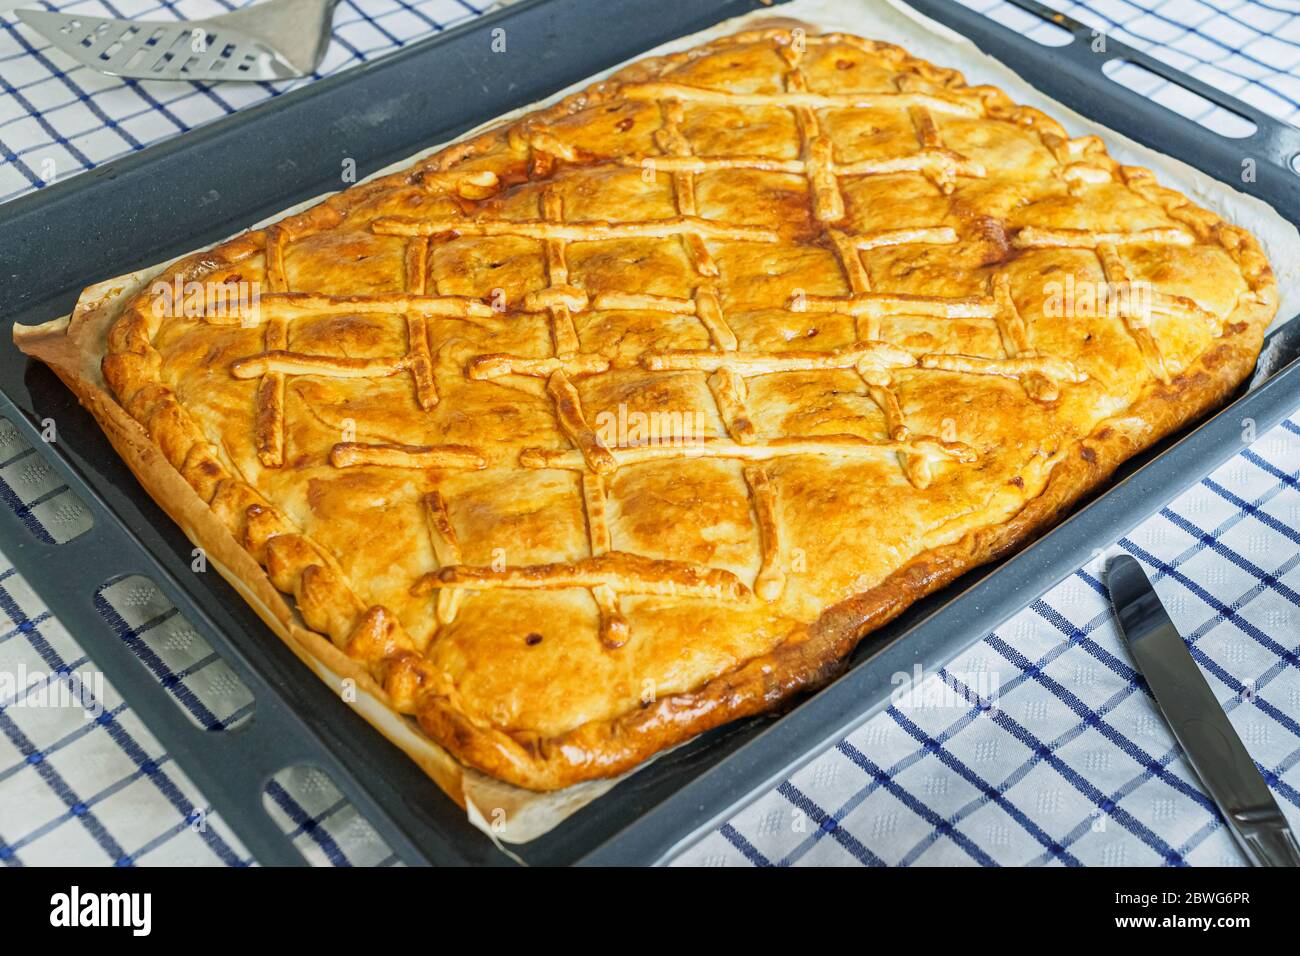 Galician pie stuffed with meat and tuna, typical spanish food Stock Photo